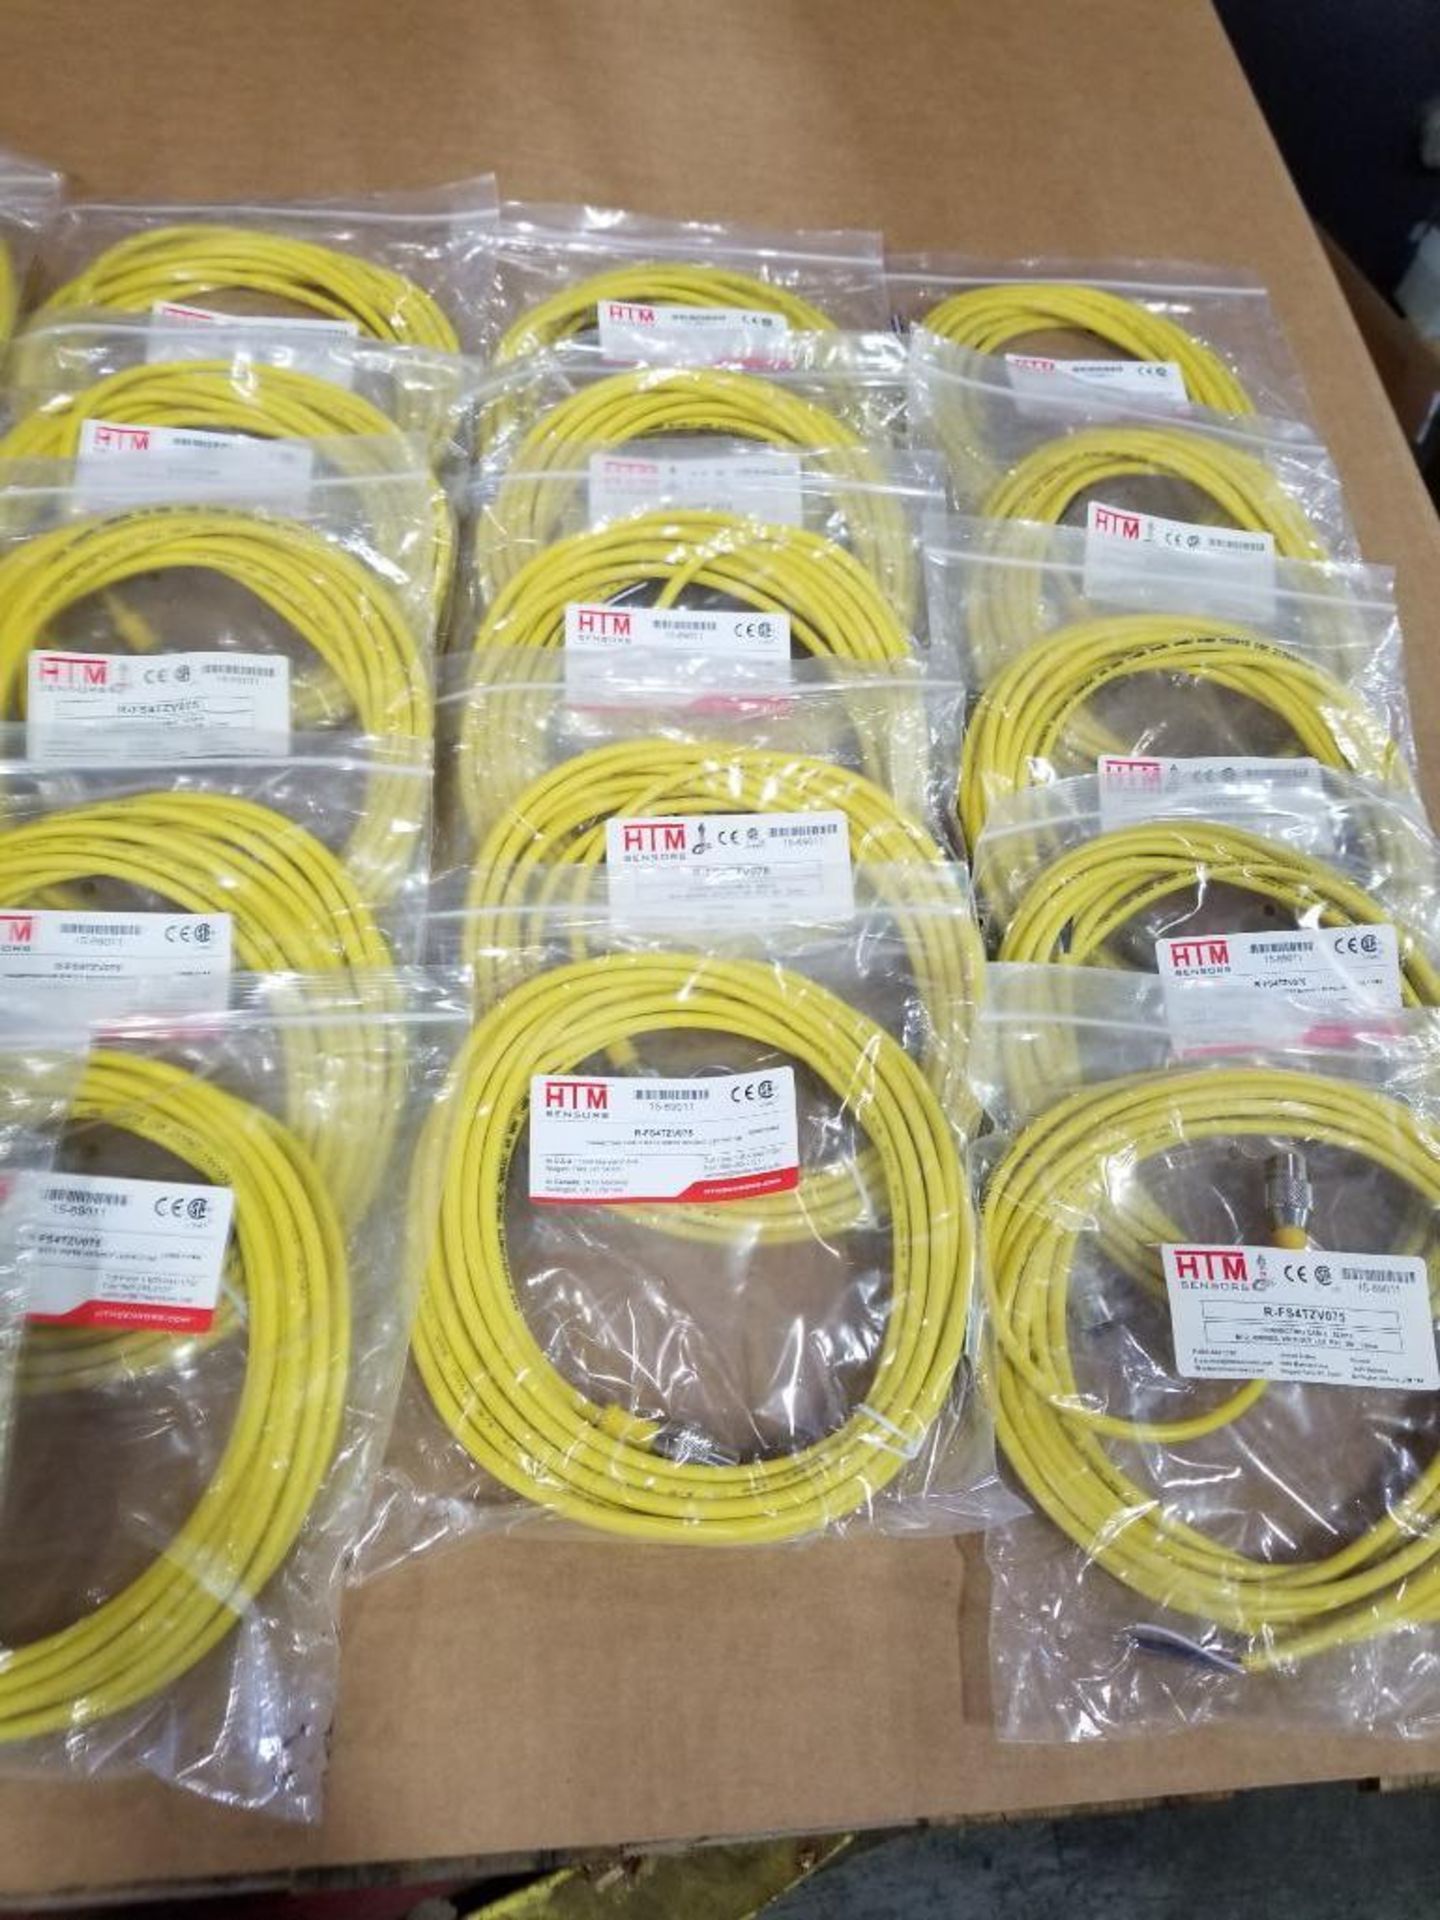 Qty 32 - Assorted interconnect cables. New in package. - Image 3 of 5